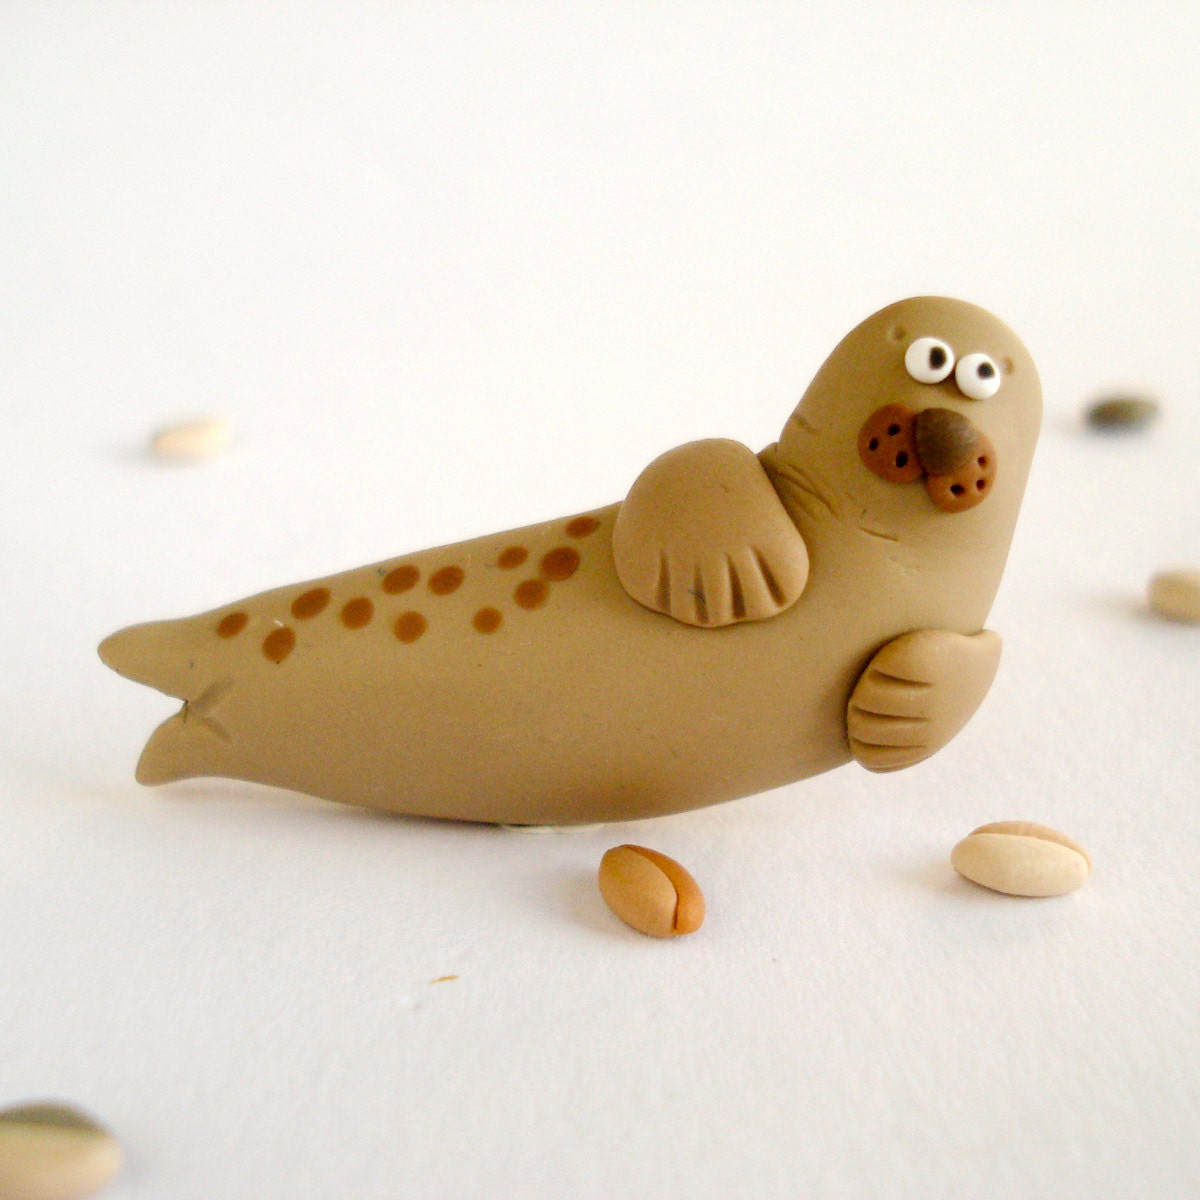 Seal Brooch Whimsical animal jewelry unisex - Thelittlecreatures